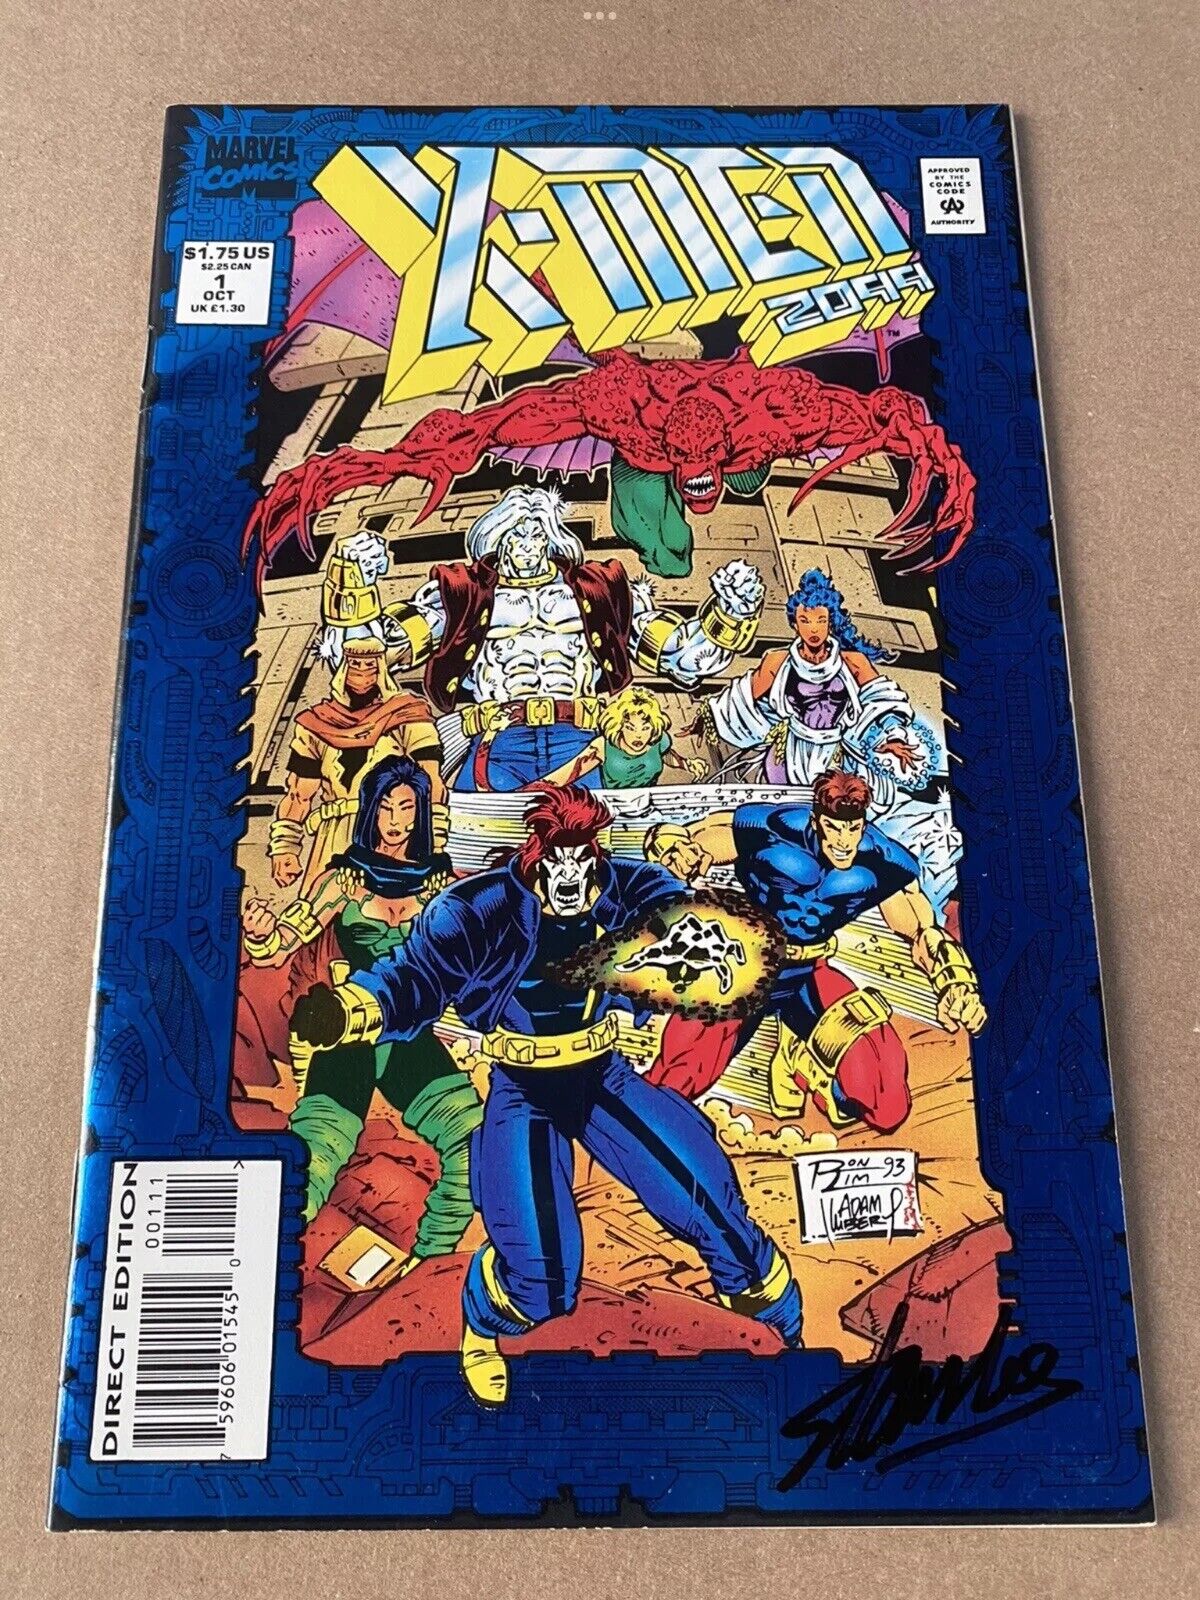 X-Men 2099 Issue 1 Signed By Stan Lee Wolverine Cyclops